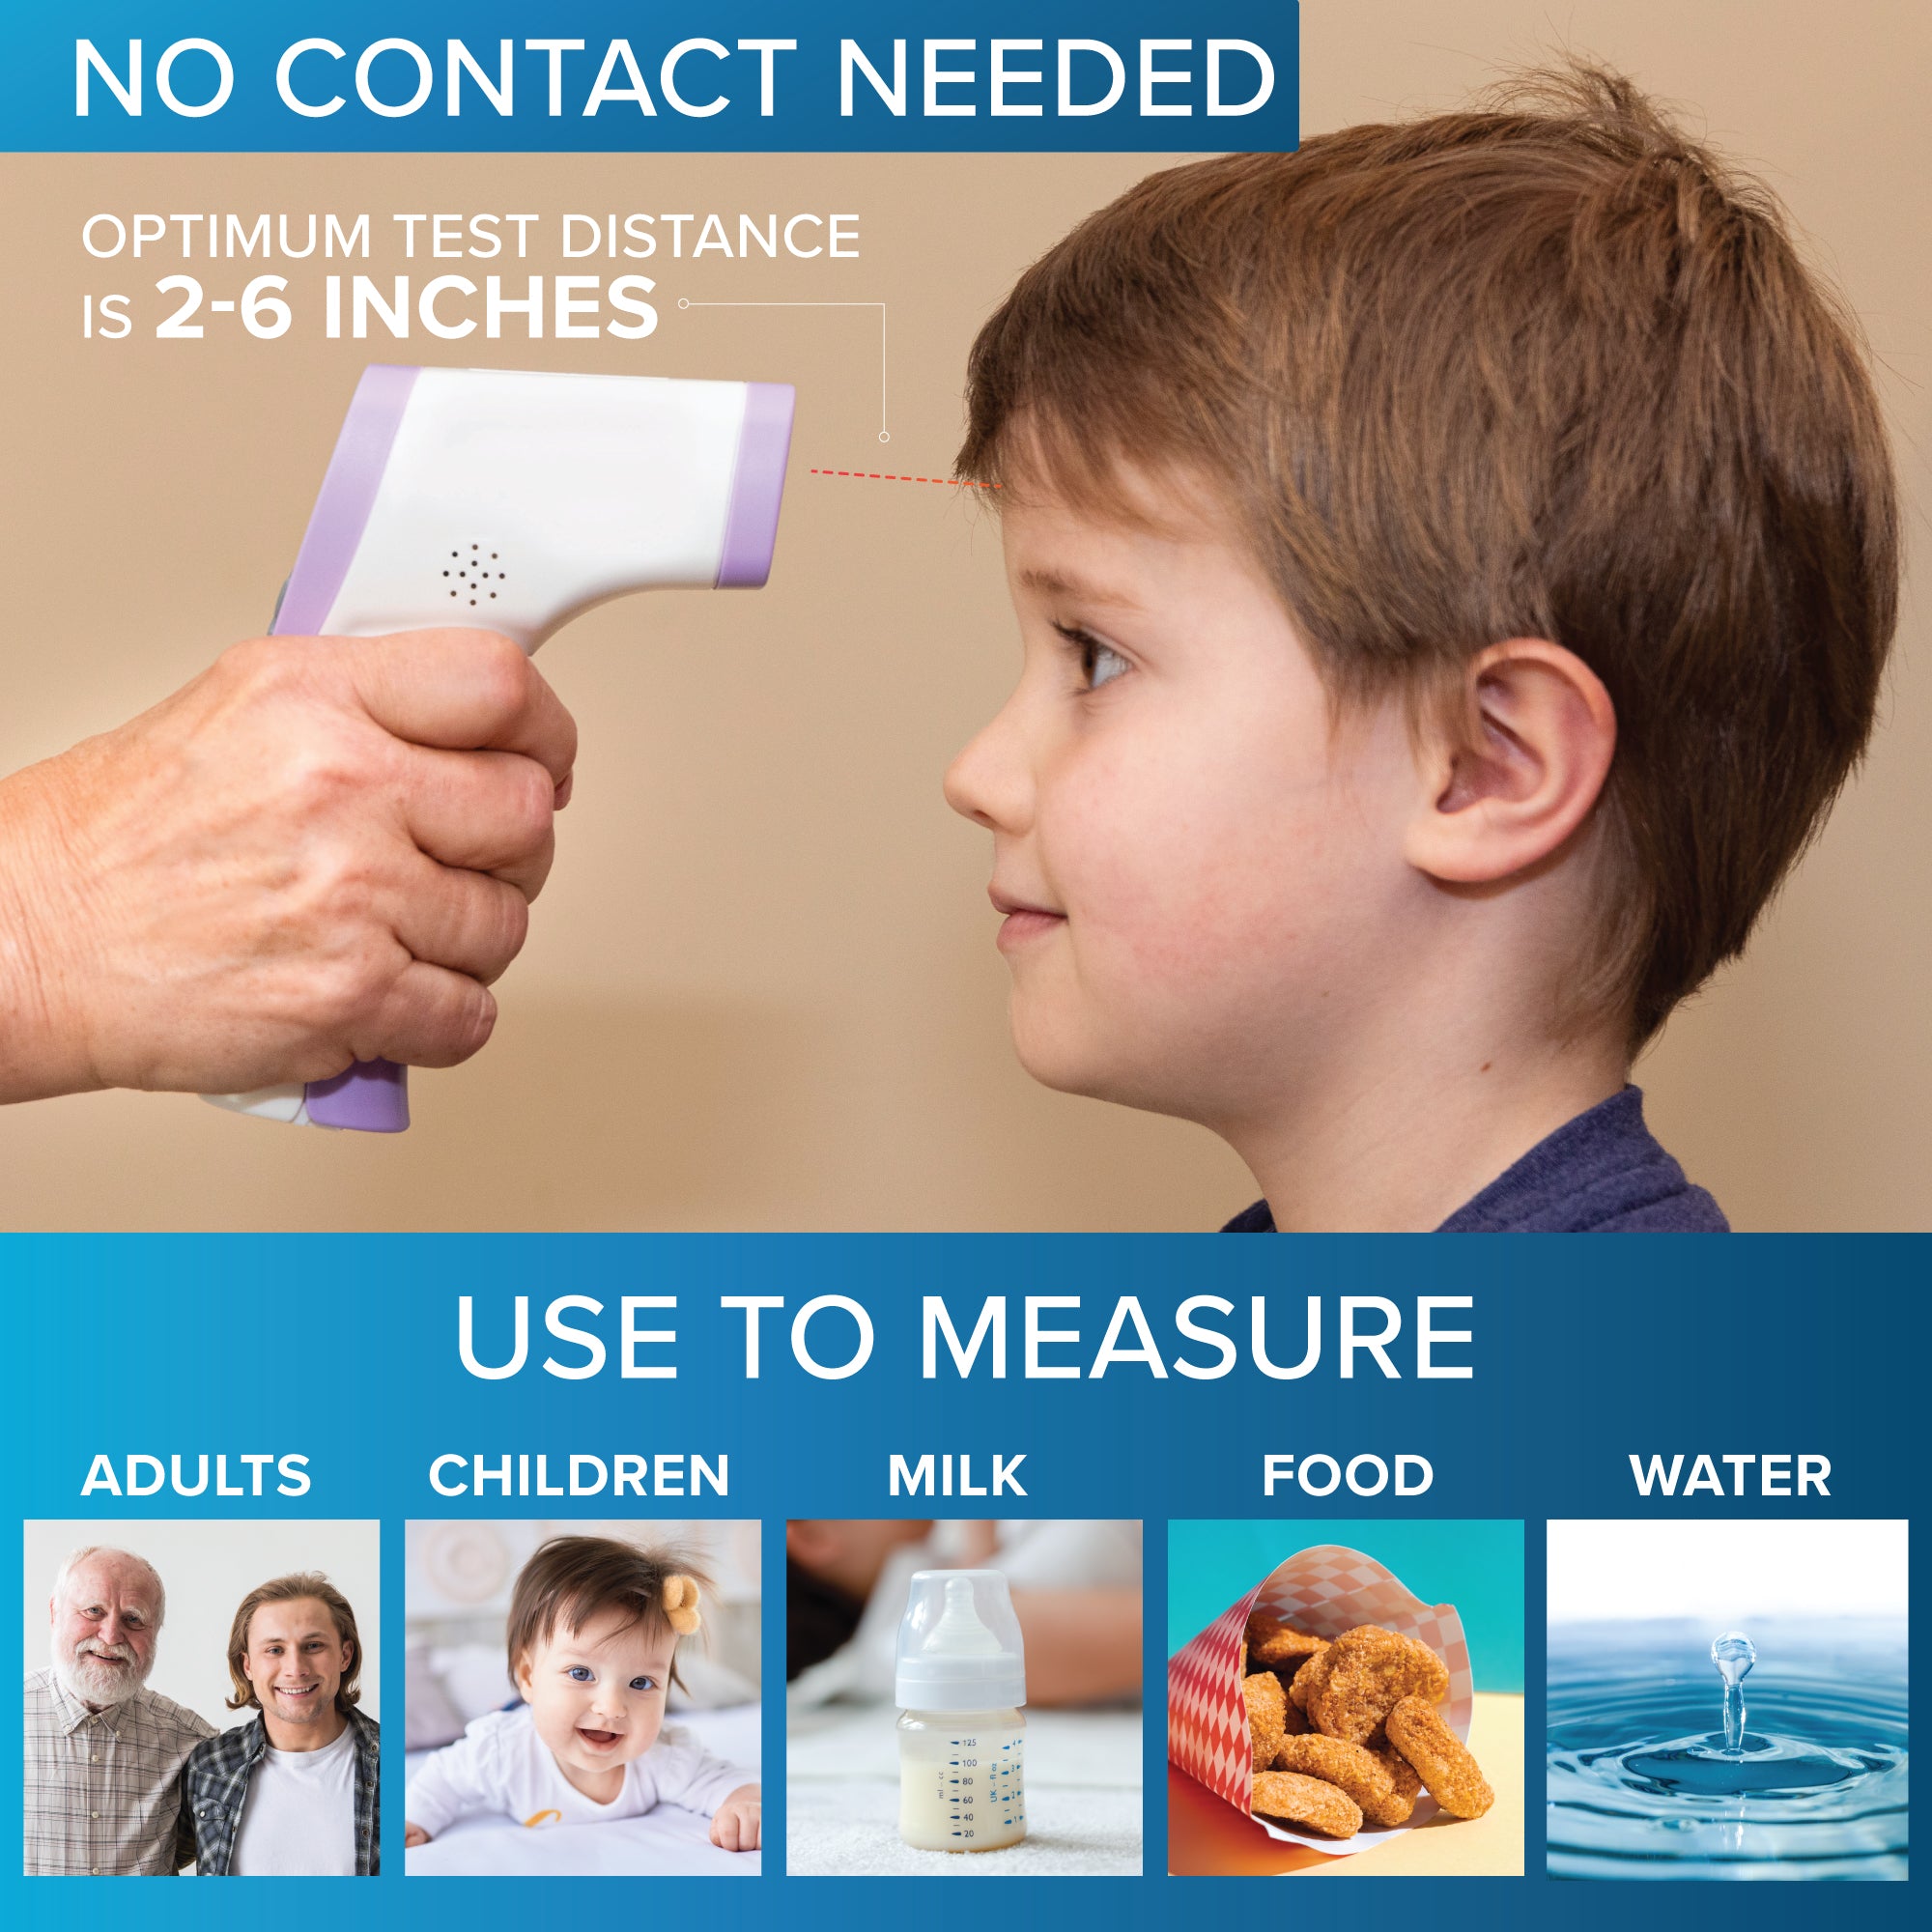 Baby Products Online - Non-contact forehead thermometer, digital